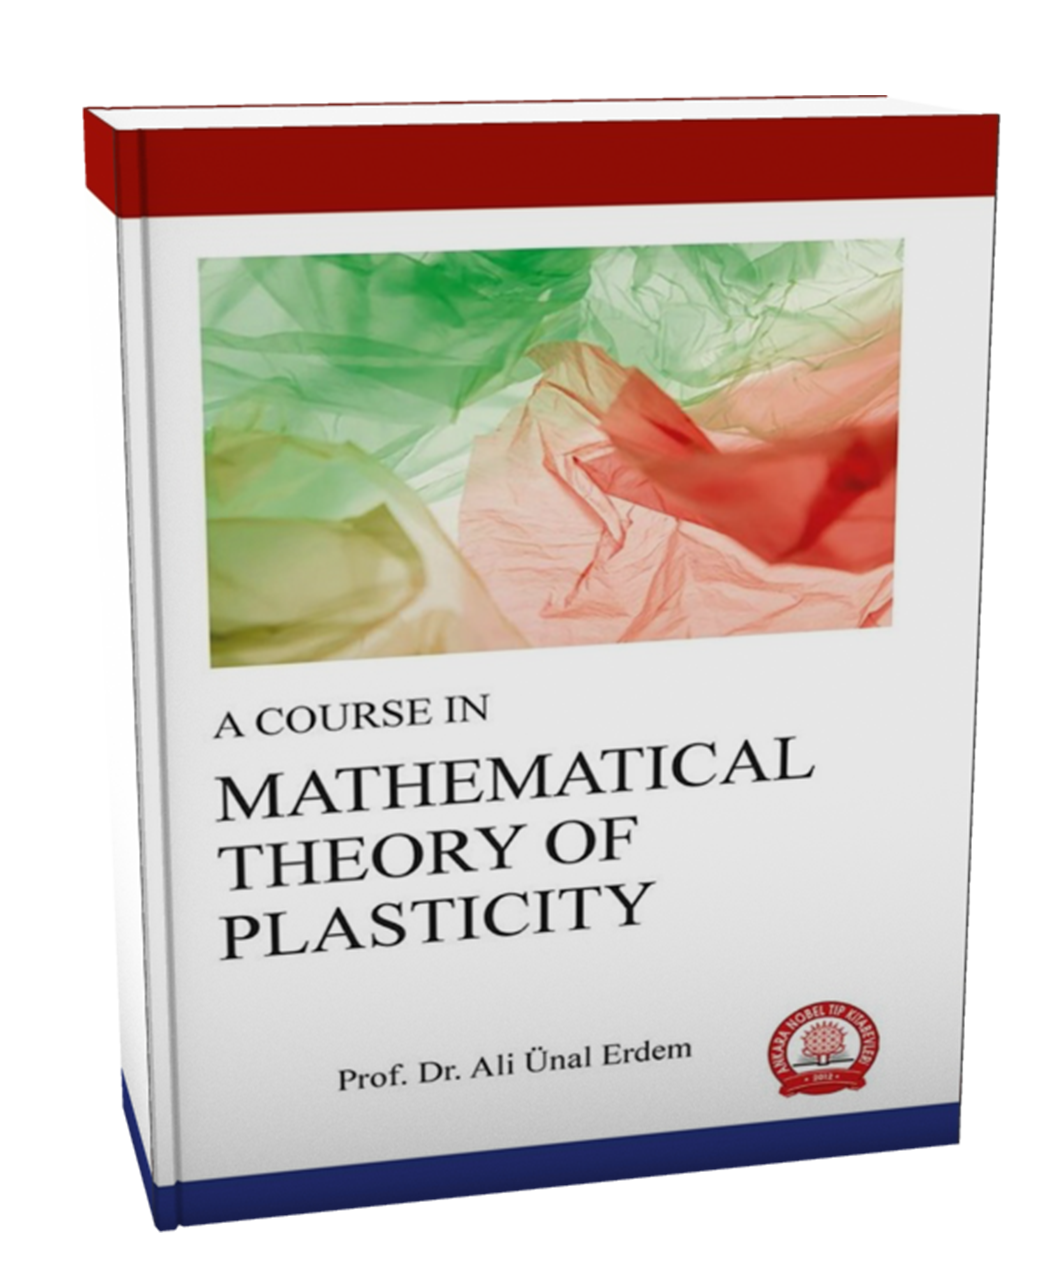 A COURSE IN MATHEMATICAL THEORY OF PLASTICITY